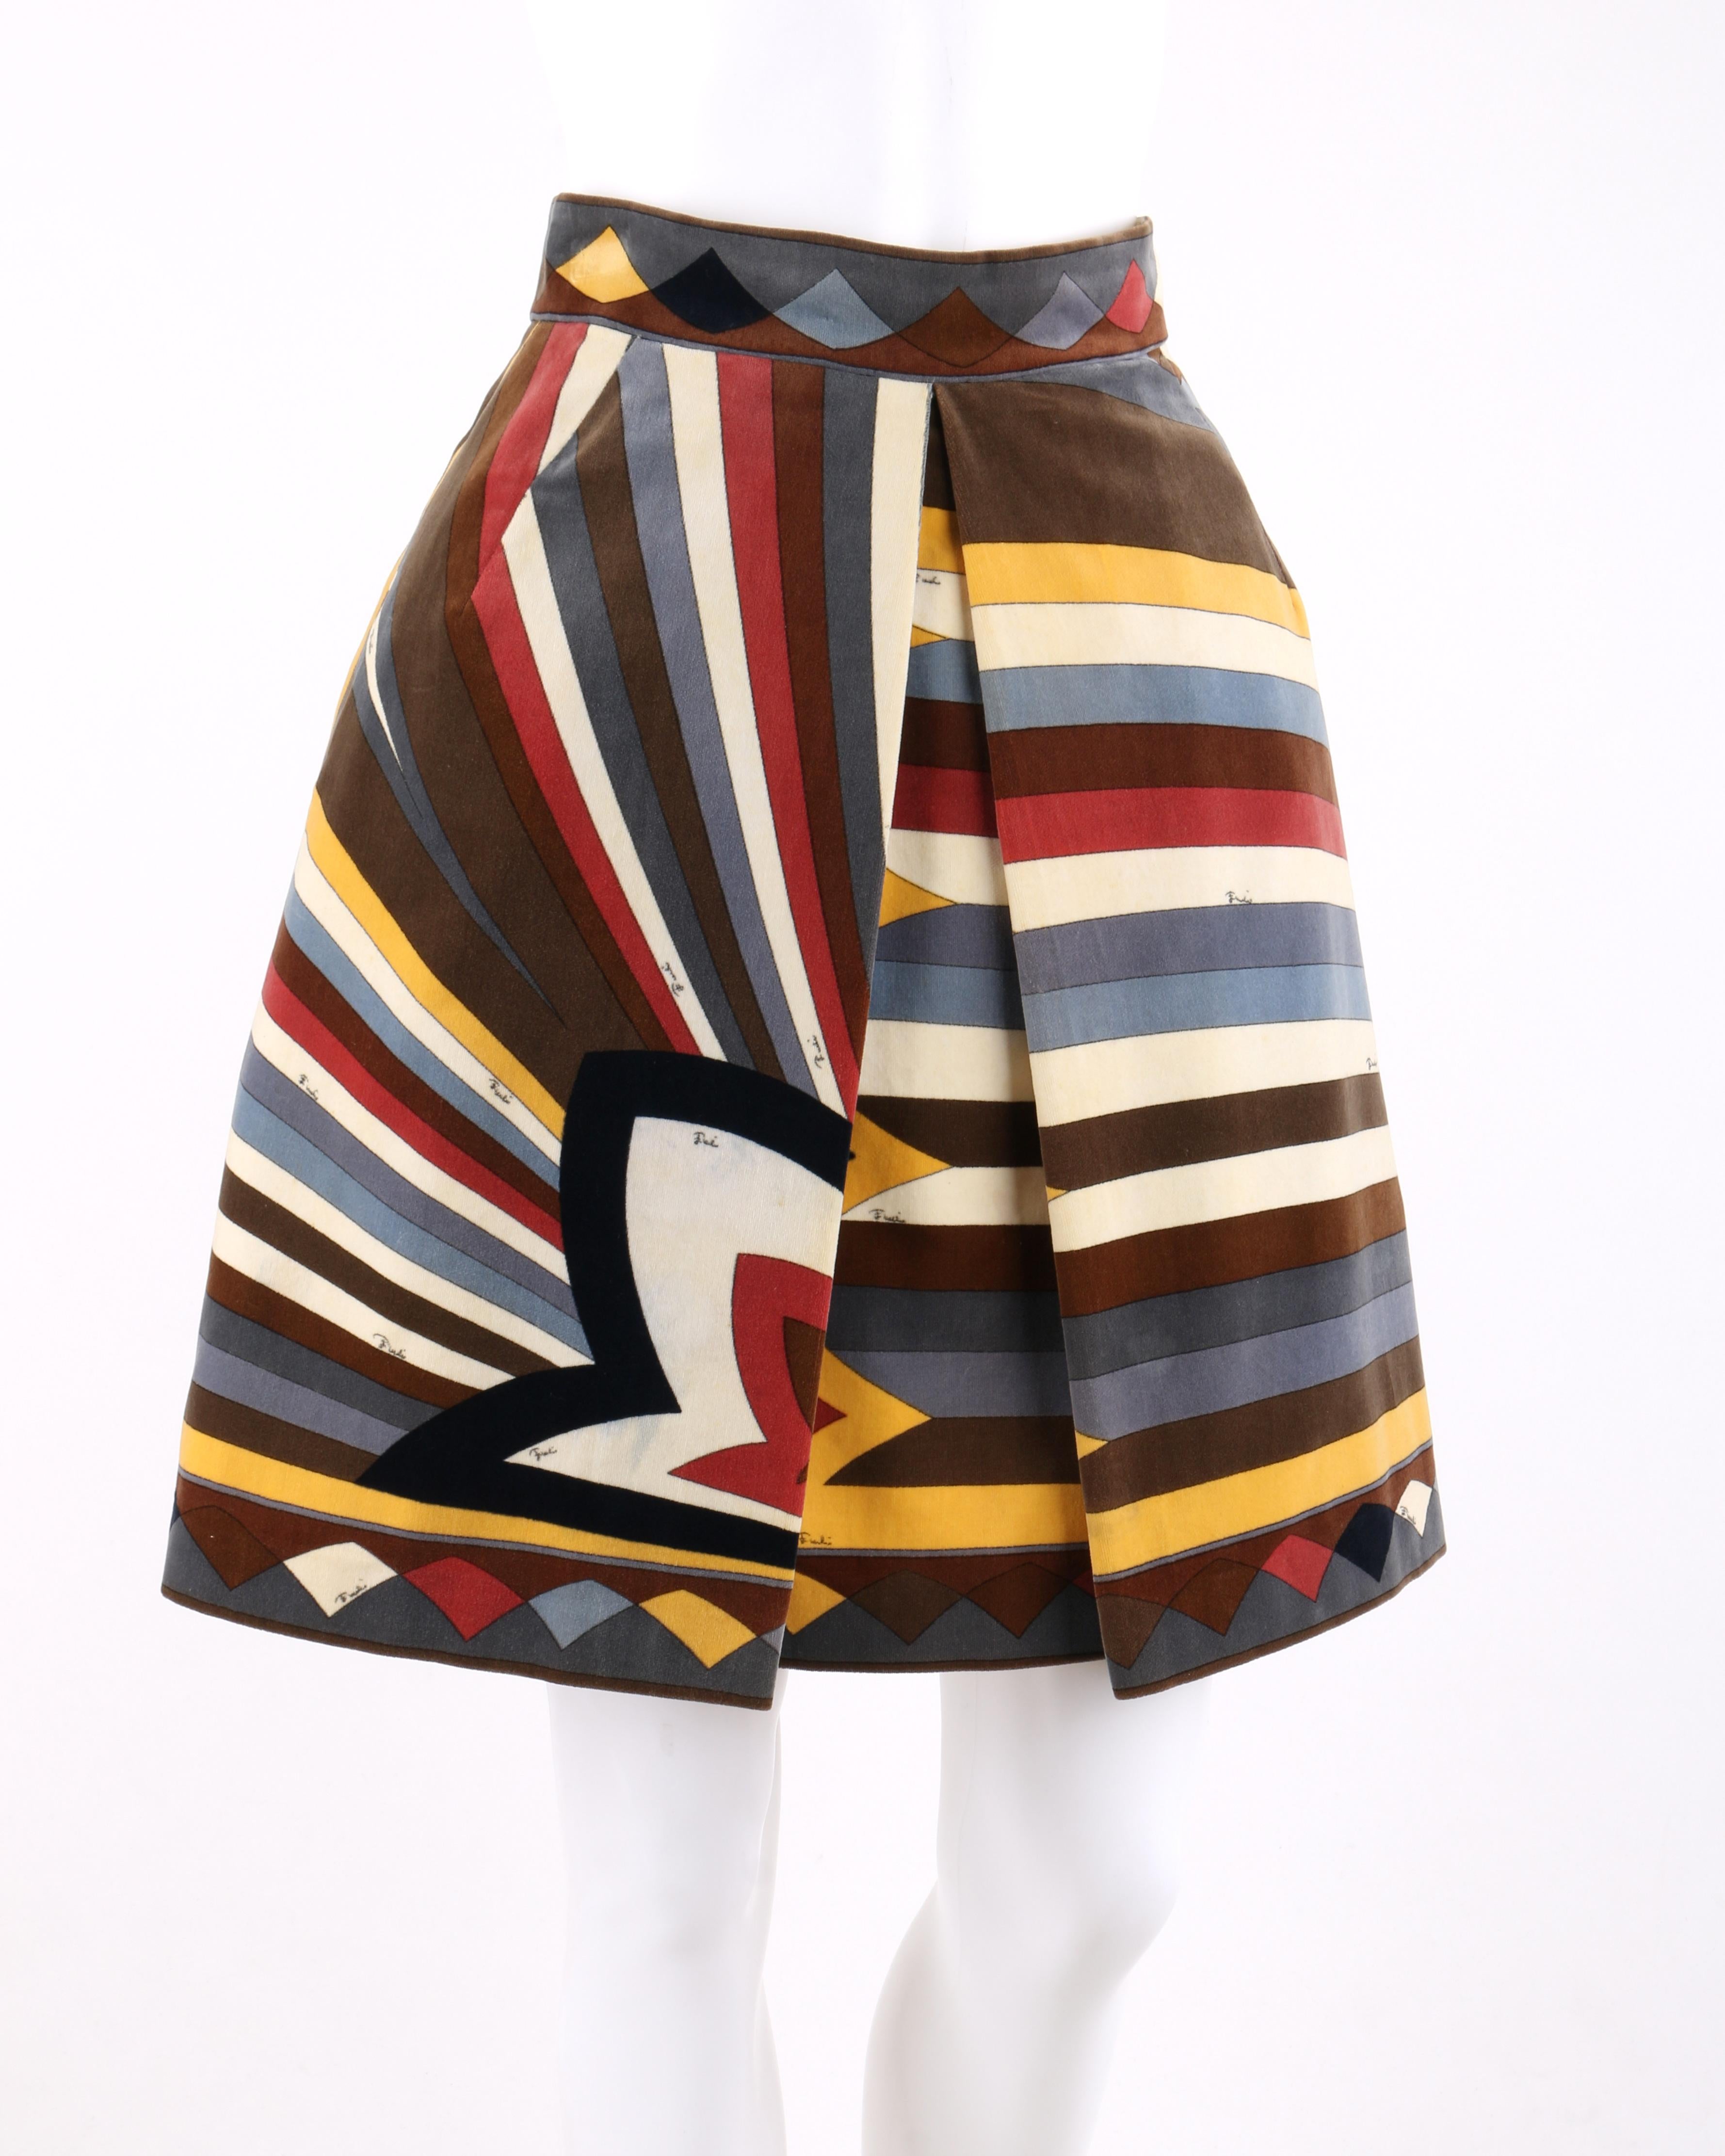 EMILIO PUCCI c.1960’s Multi-color Velvet Signature Print A-Line Pleated Skirt
 
Circa: 1960’s 
Label(s): Emilio Pucci / Exclusively for Sak’s Fifth Avenue.   
Style: A-line skirt
Color(s): Shades of brown, cream, yellow, red, blue, grey and black.